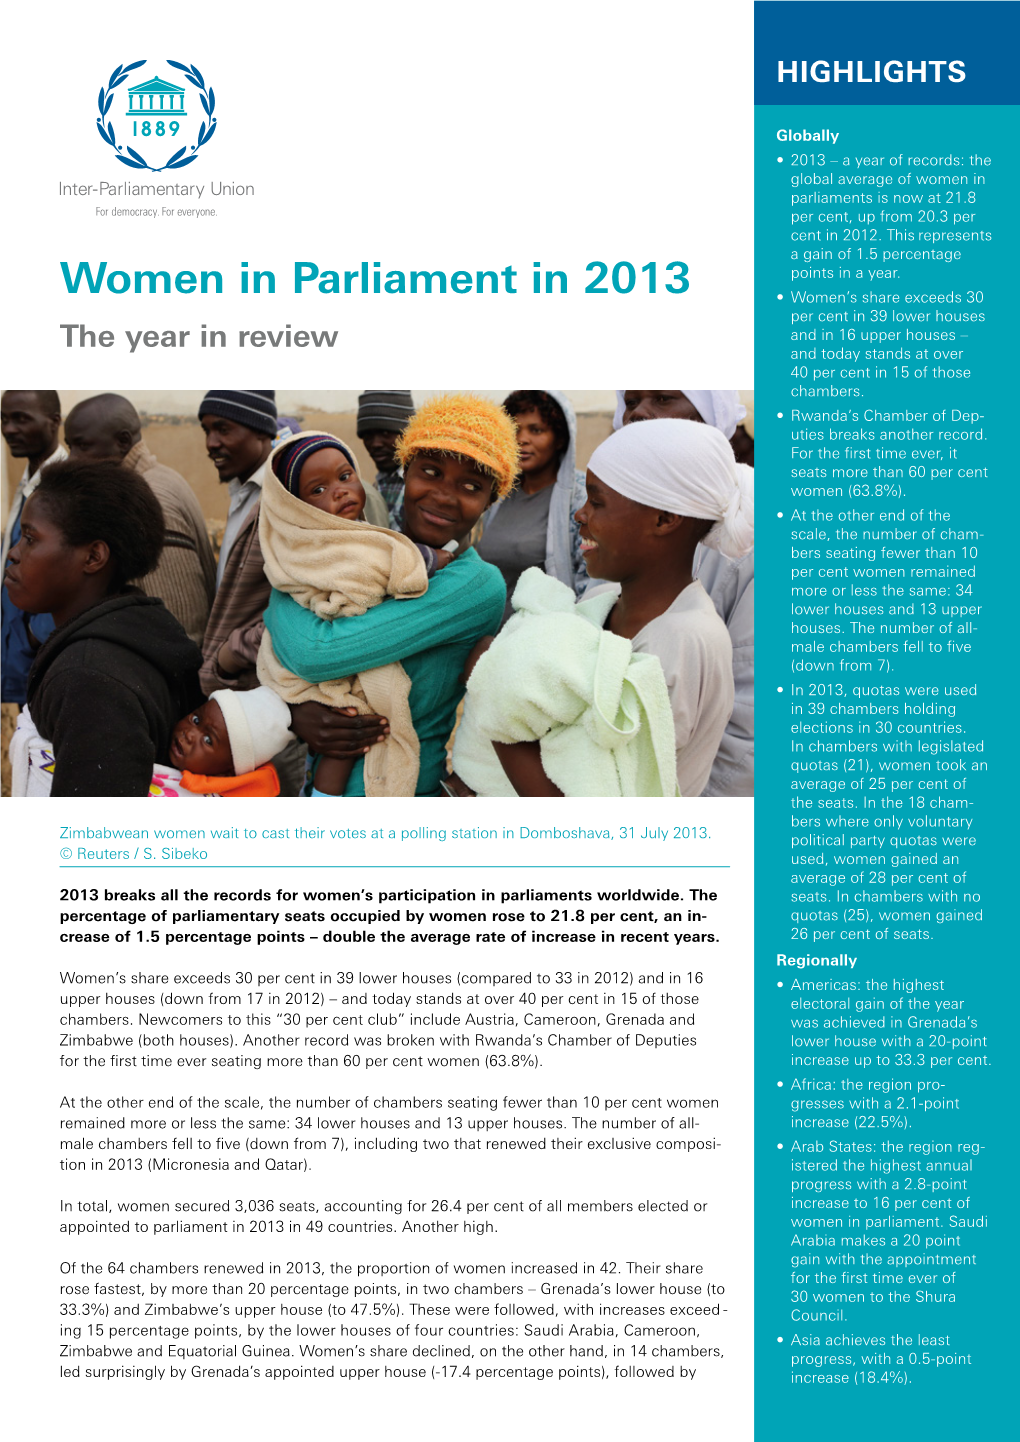 Women in Parliament in 2013: the Year in Review